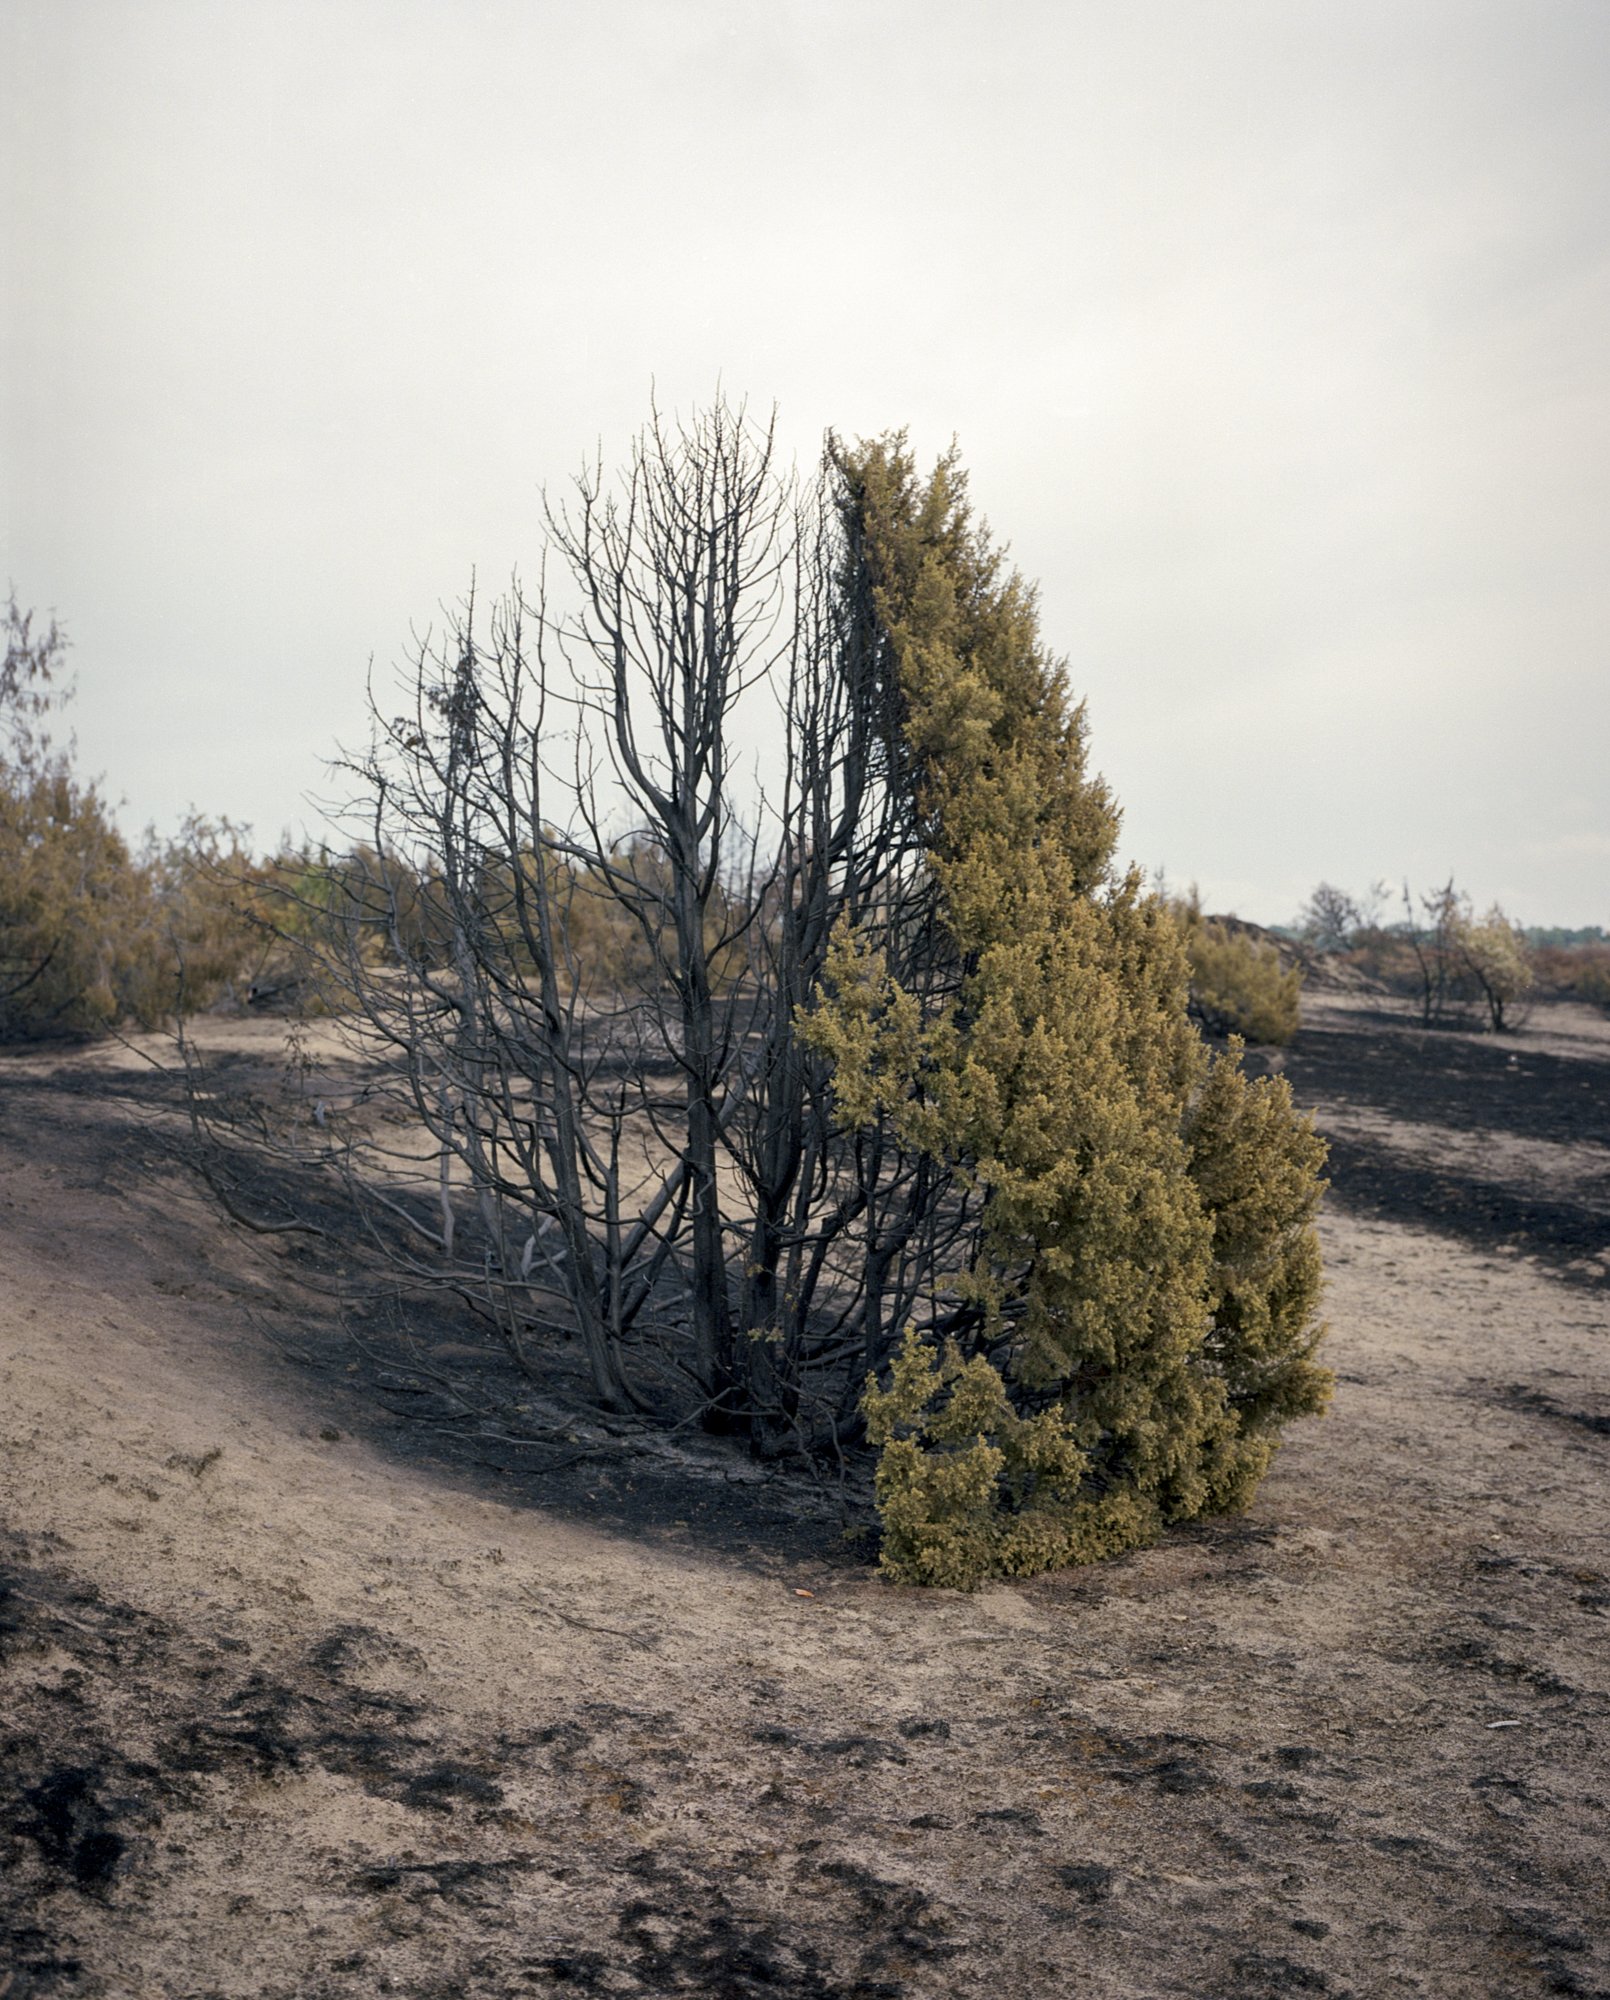  A half-burnt tree remained from the biggest forest fire of late summer.  Táborfalva, Hungary, 2022 